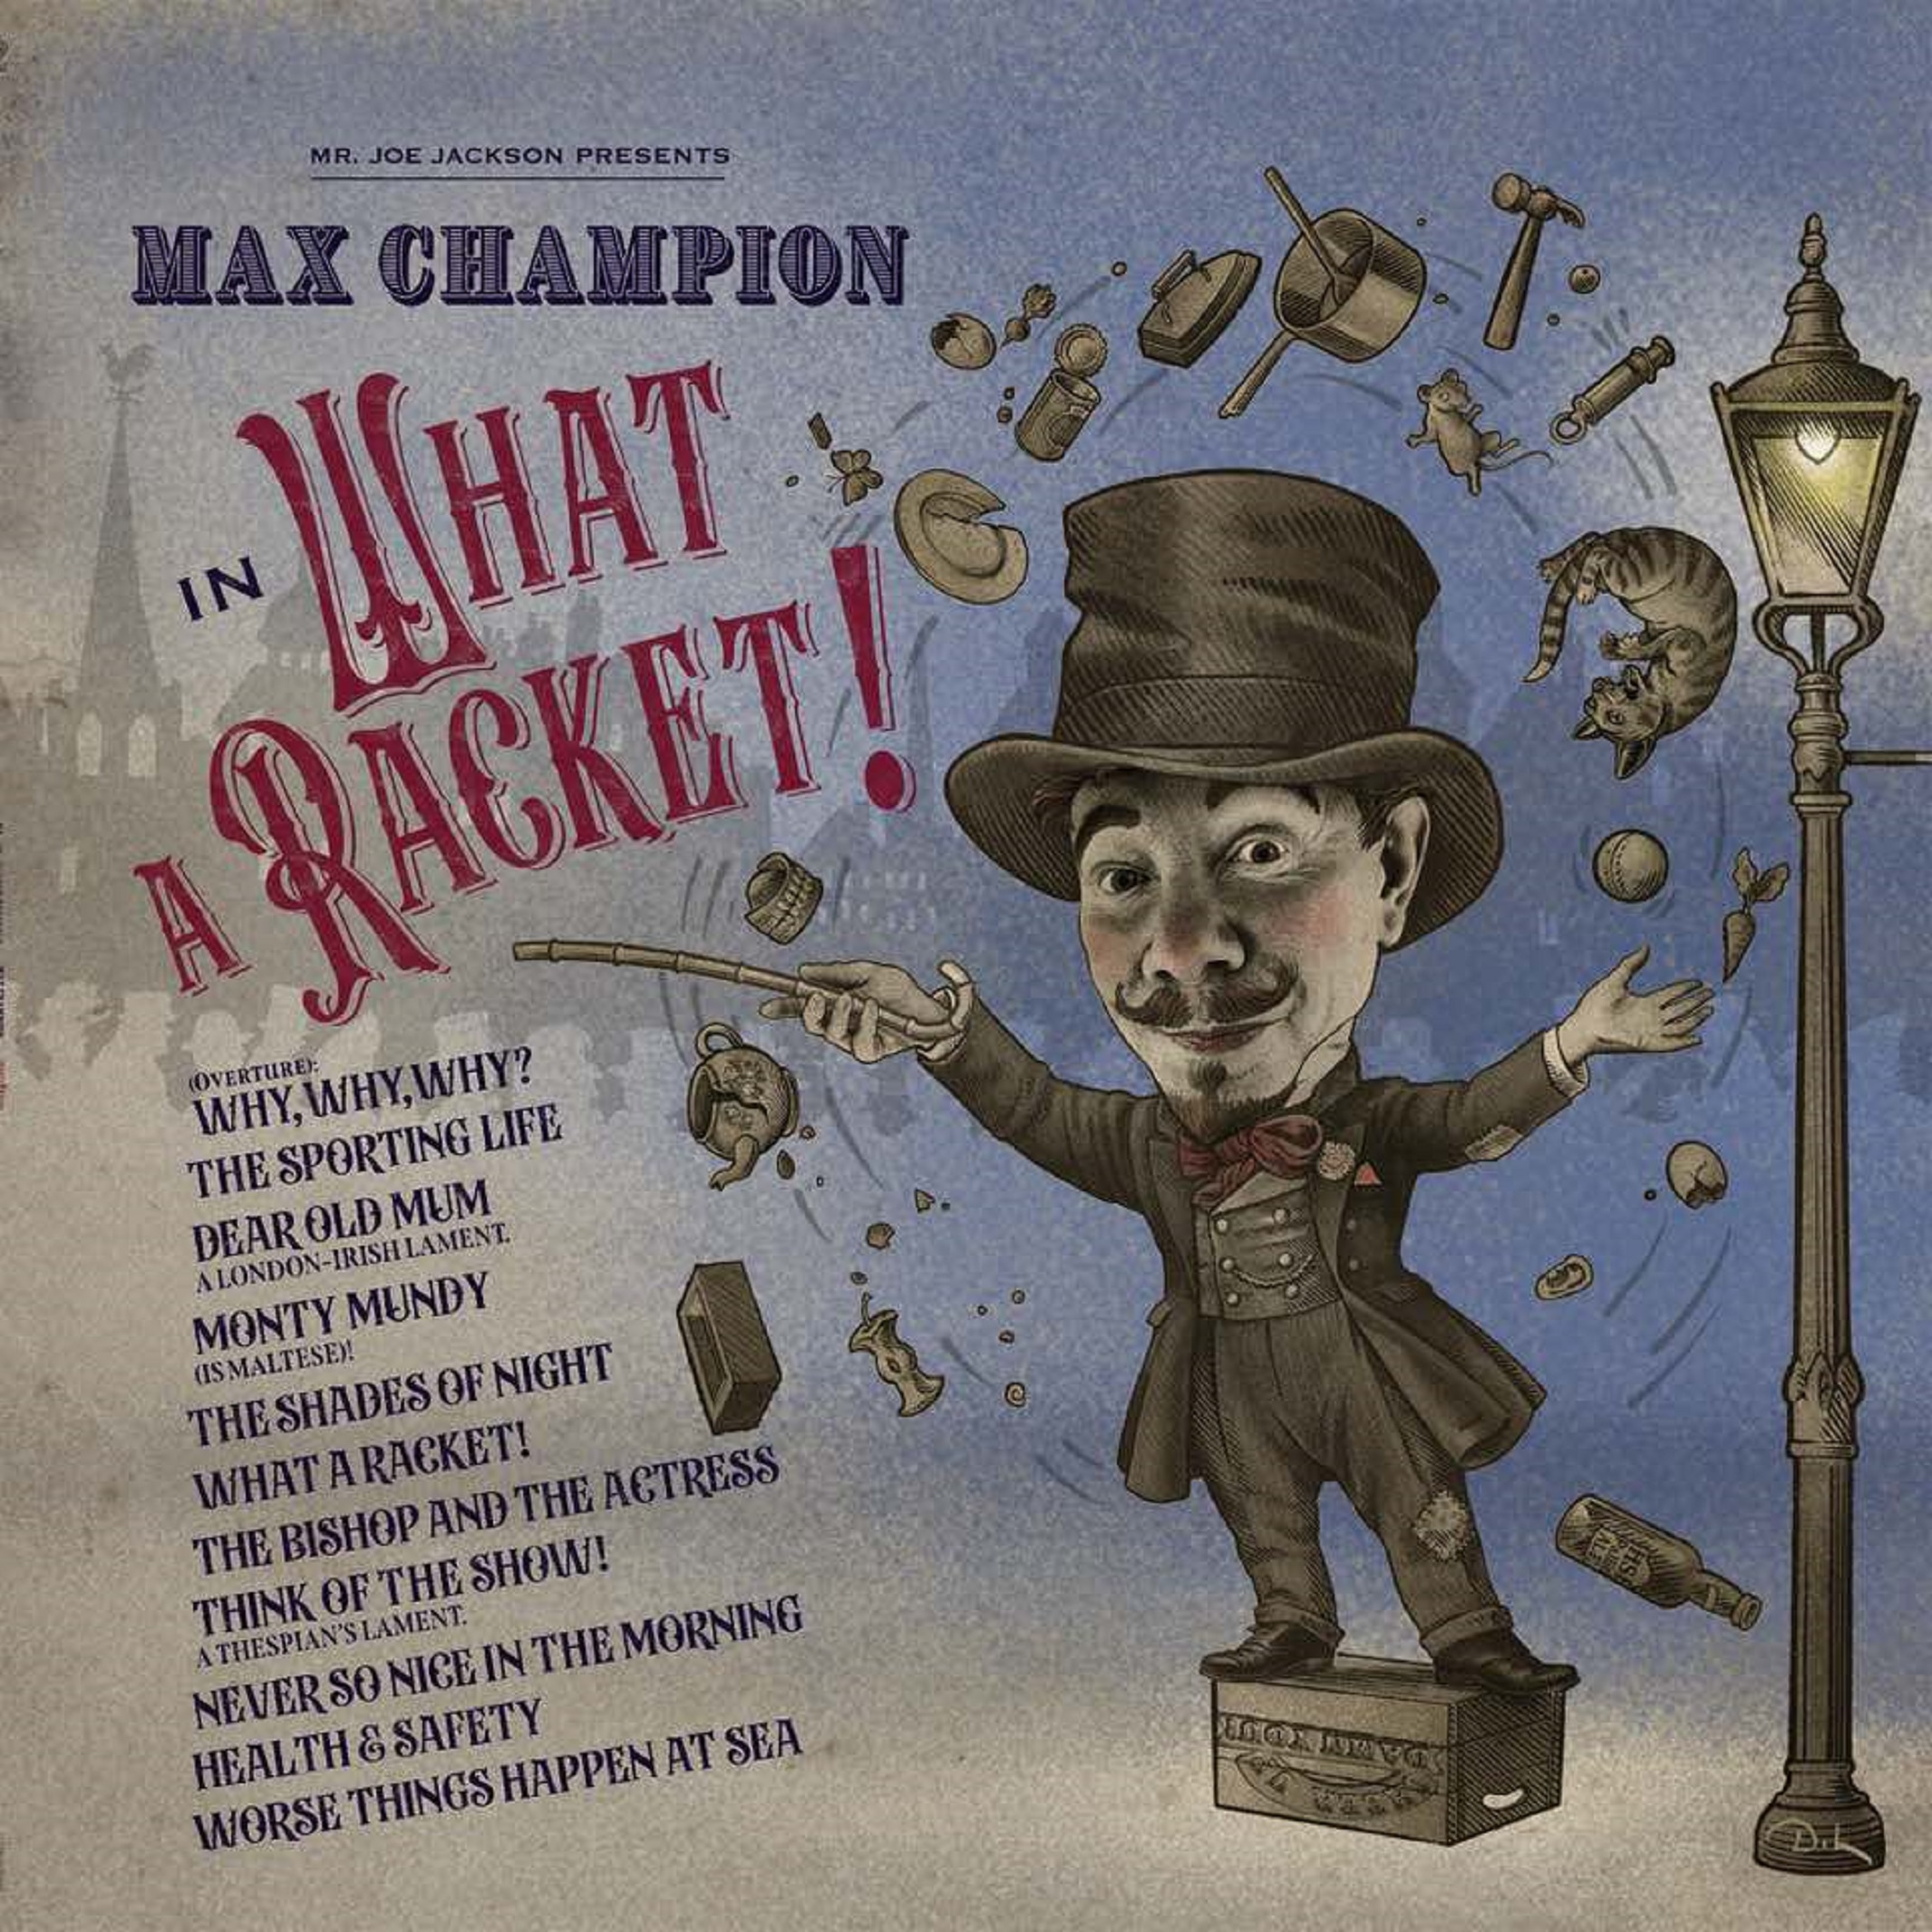 JOE JACKSON REVEALS THE TITLE TRACK "WHAT A RACKET!" FROM THE UPCOMING ALBUM, REVIVING THE GENIUS OF LONG-LOST MUSIC HALL ARTIST MAX CHAMPION